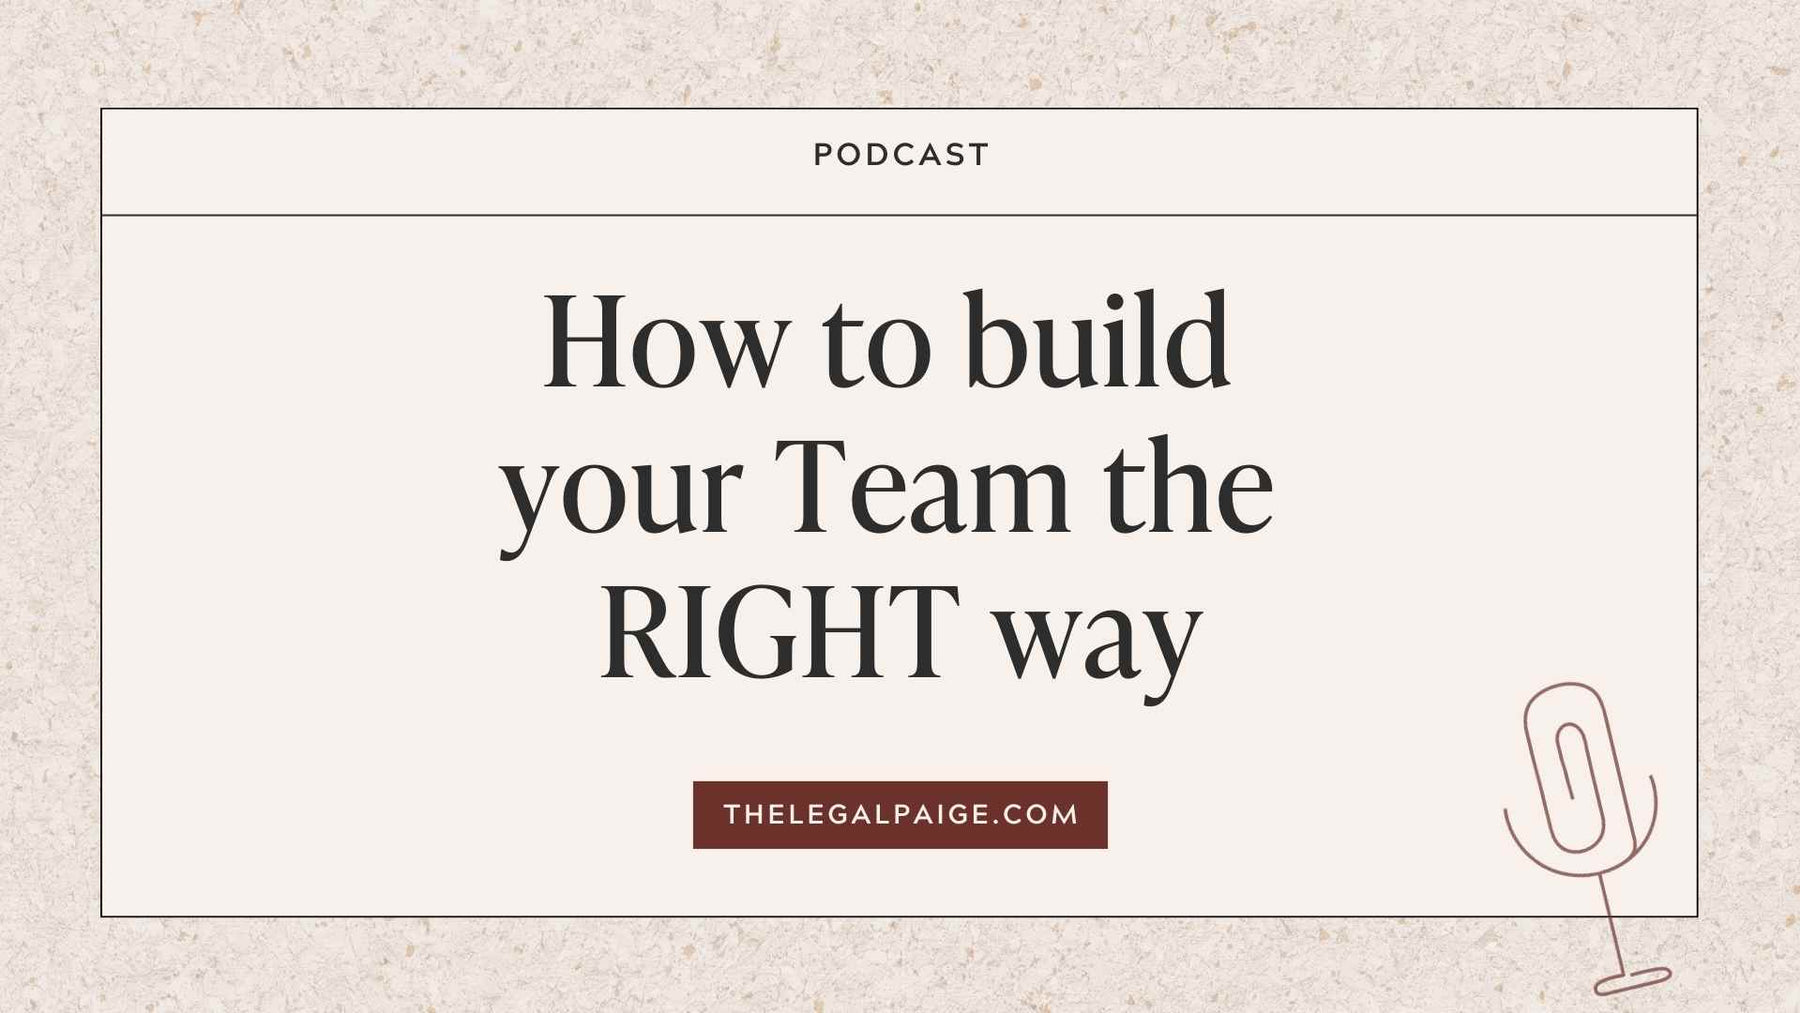 Episode 11: How to build your Team the RIGHT way